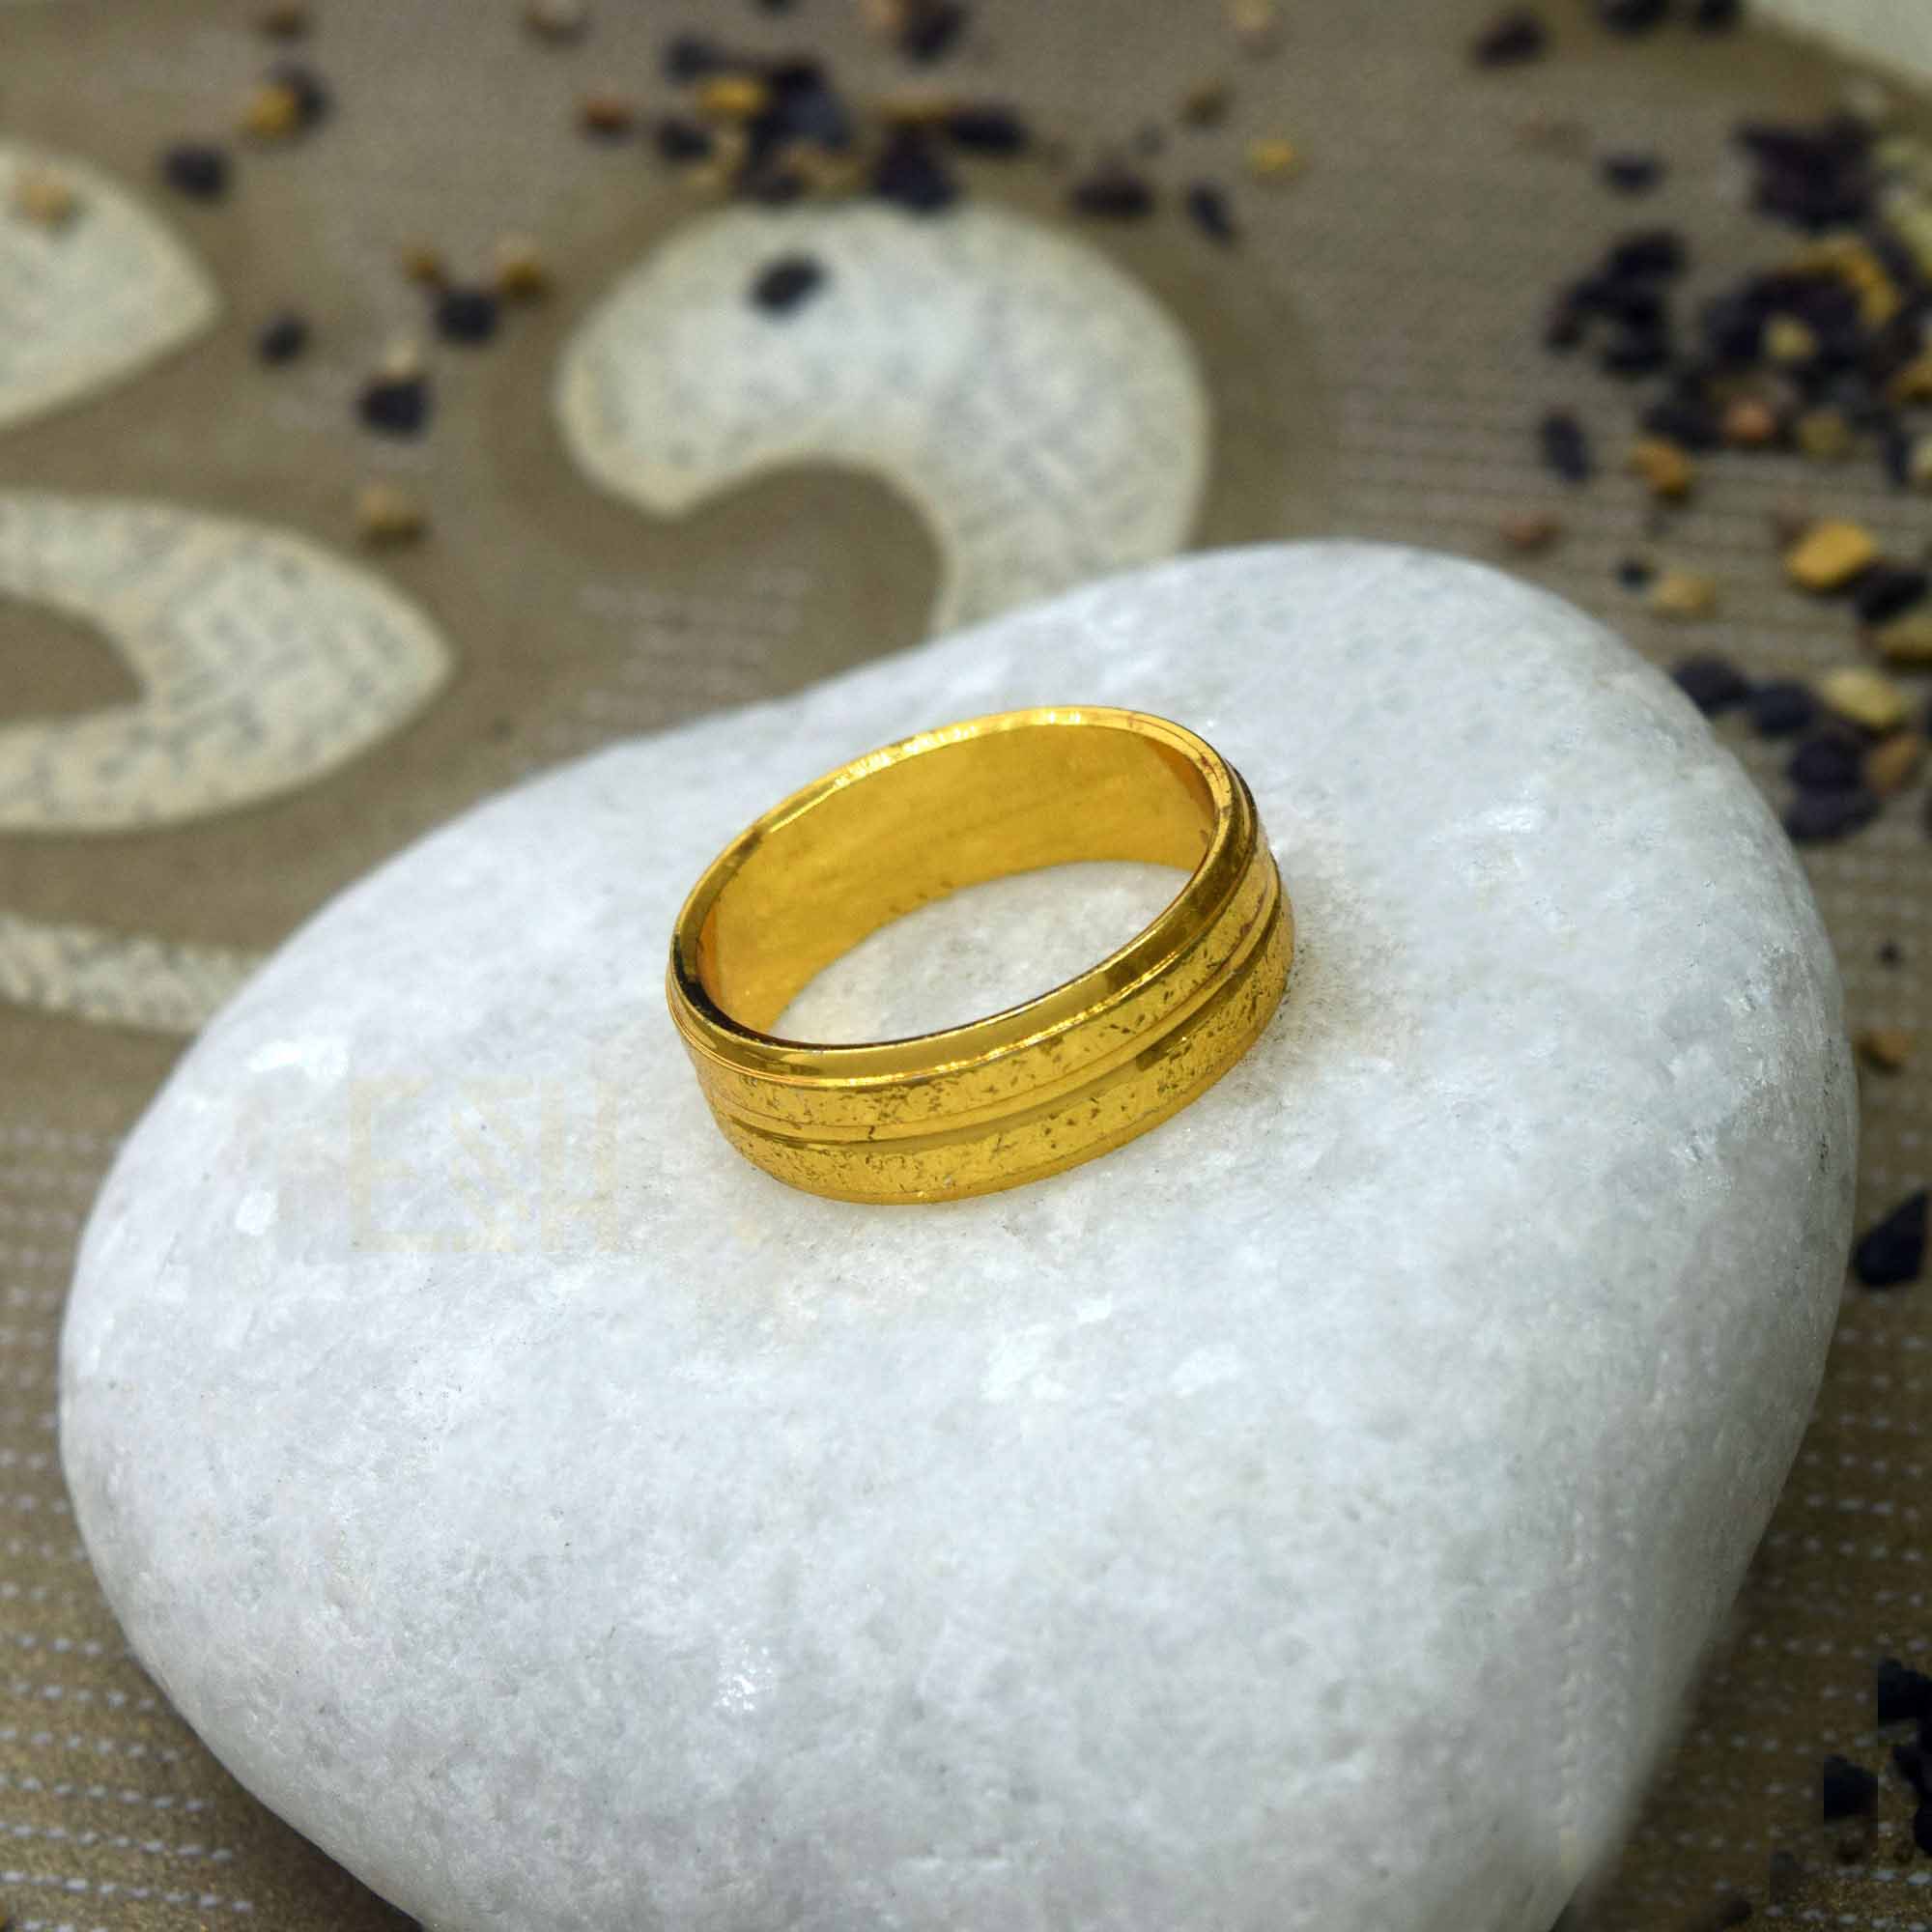 Gold Plated Wedding Ring Engagement Ring for Unisex (NBLK) Ring NowBuy.lk 3